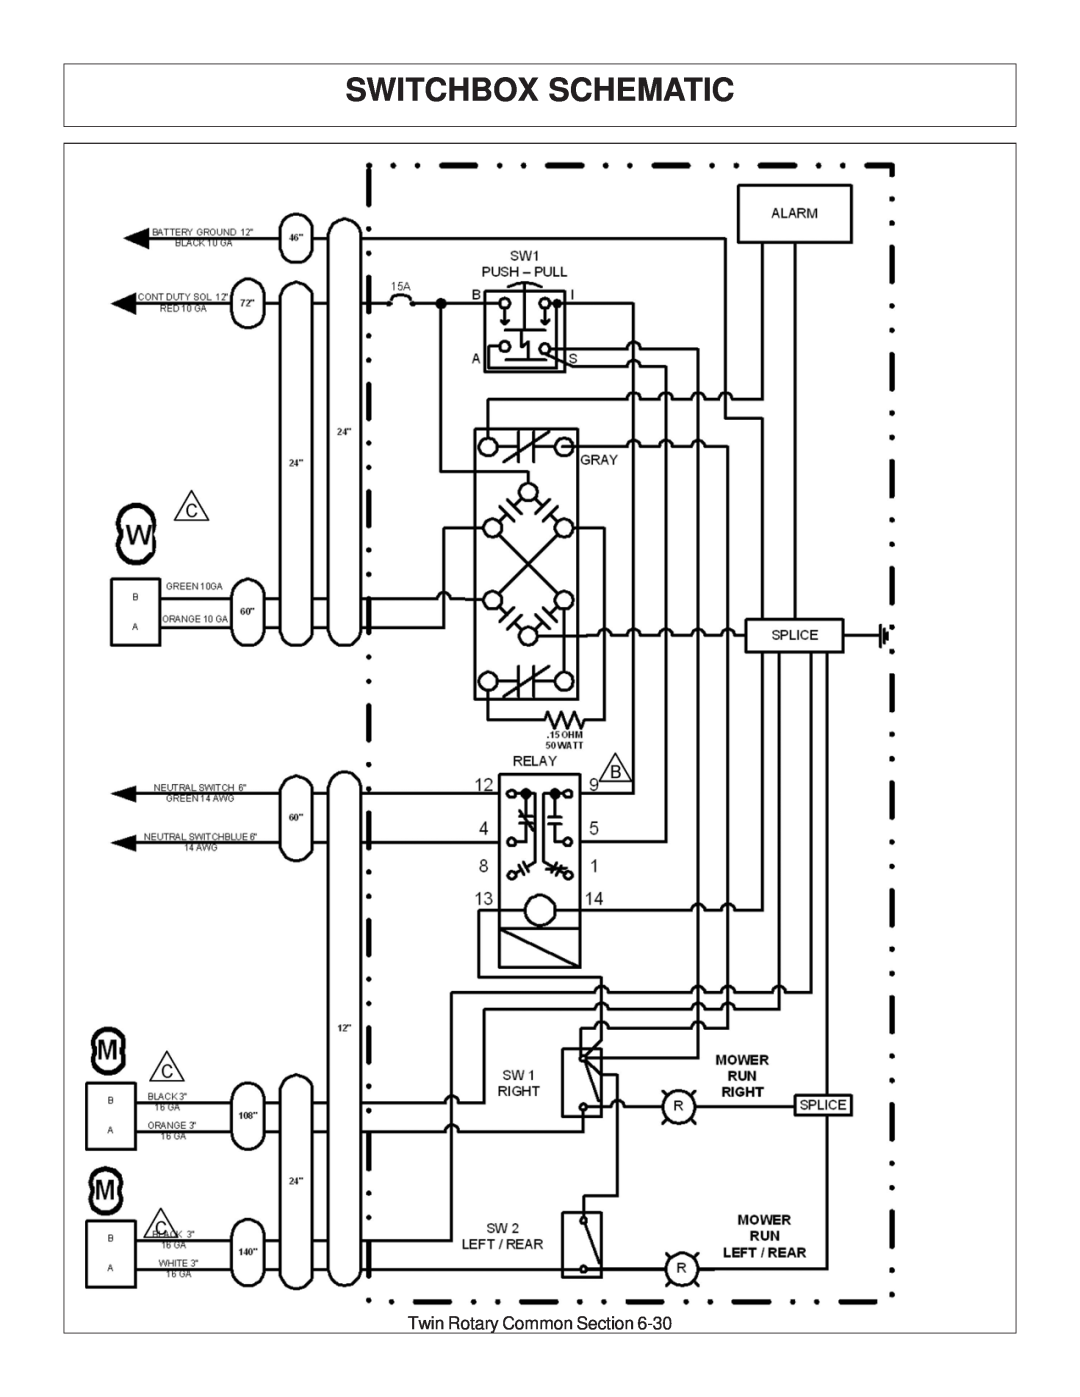 Tiger Products Co., Ltd 6020009 manual Switchbox Schematic, Twin Rotary Common Section 